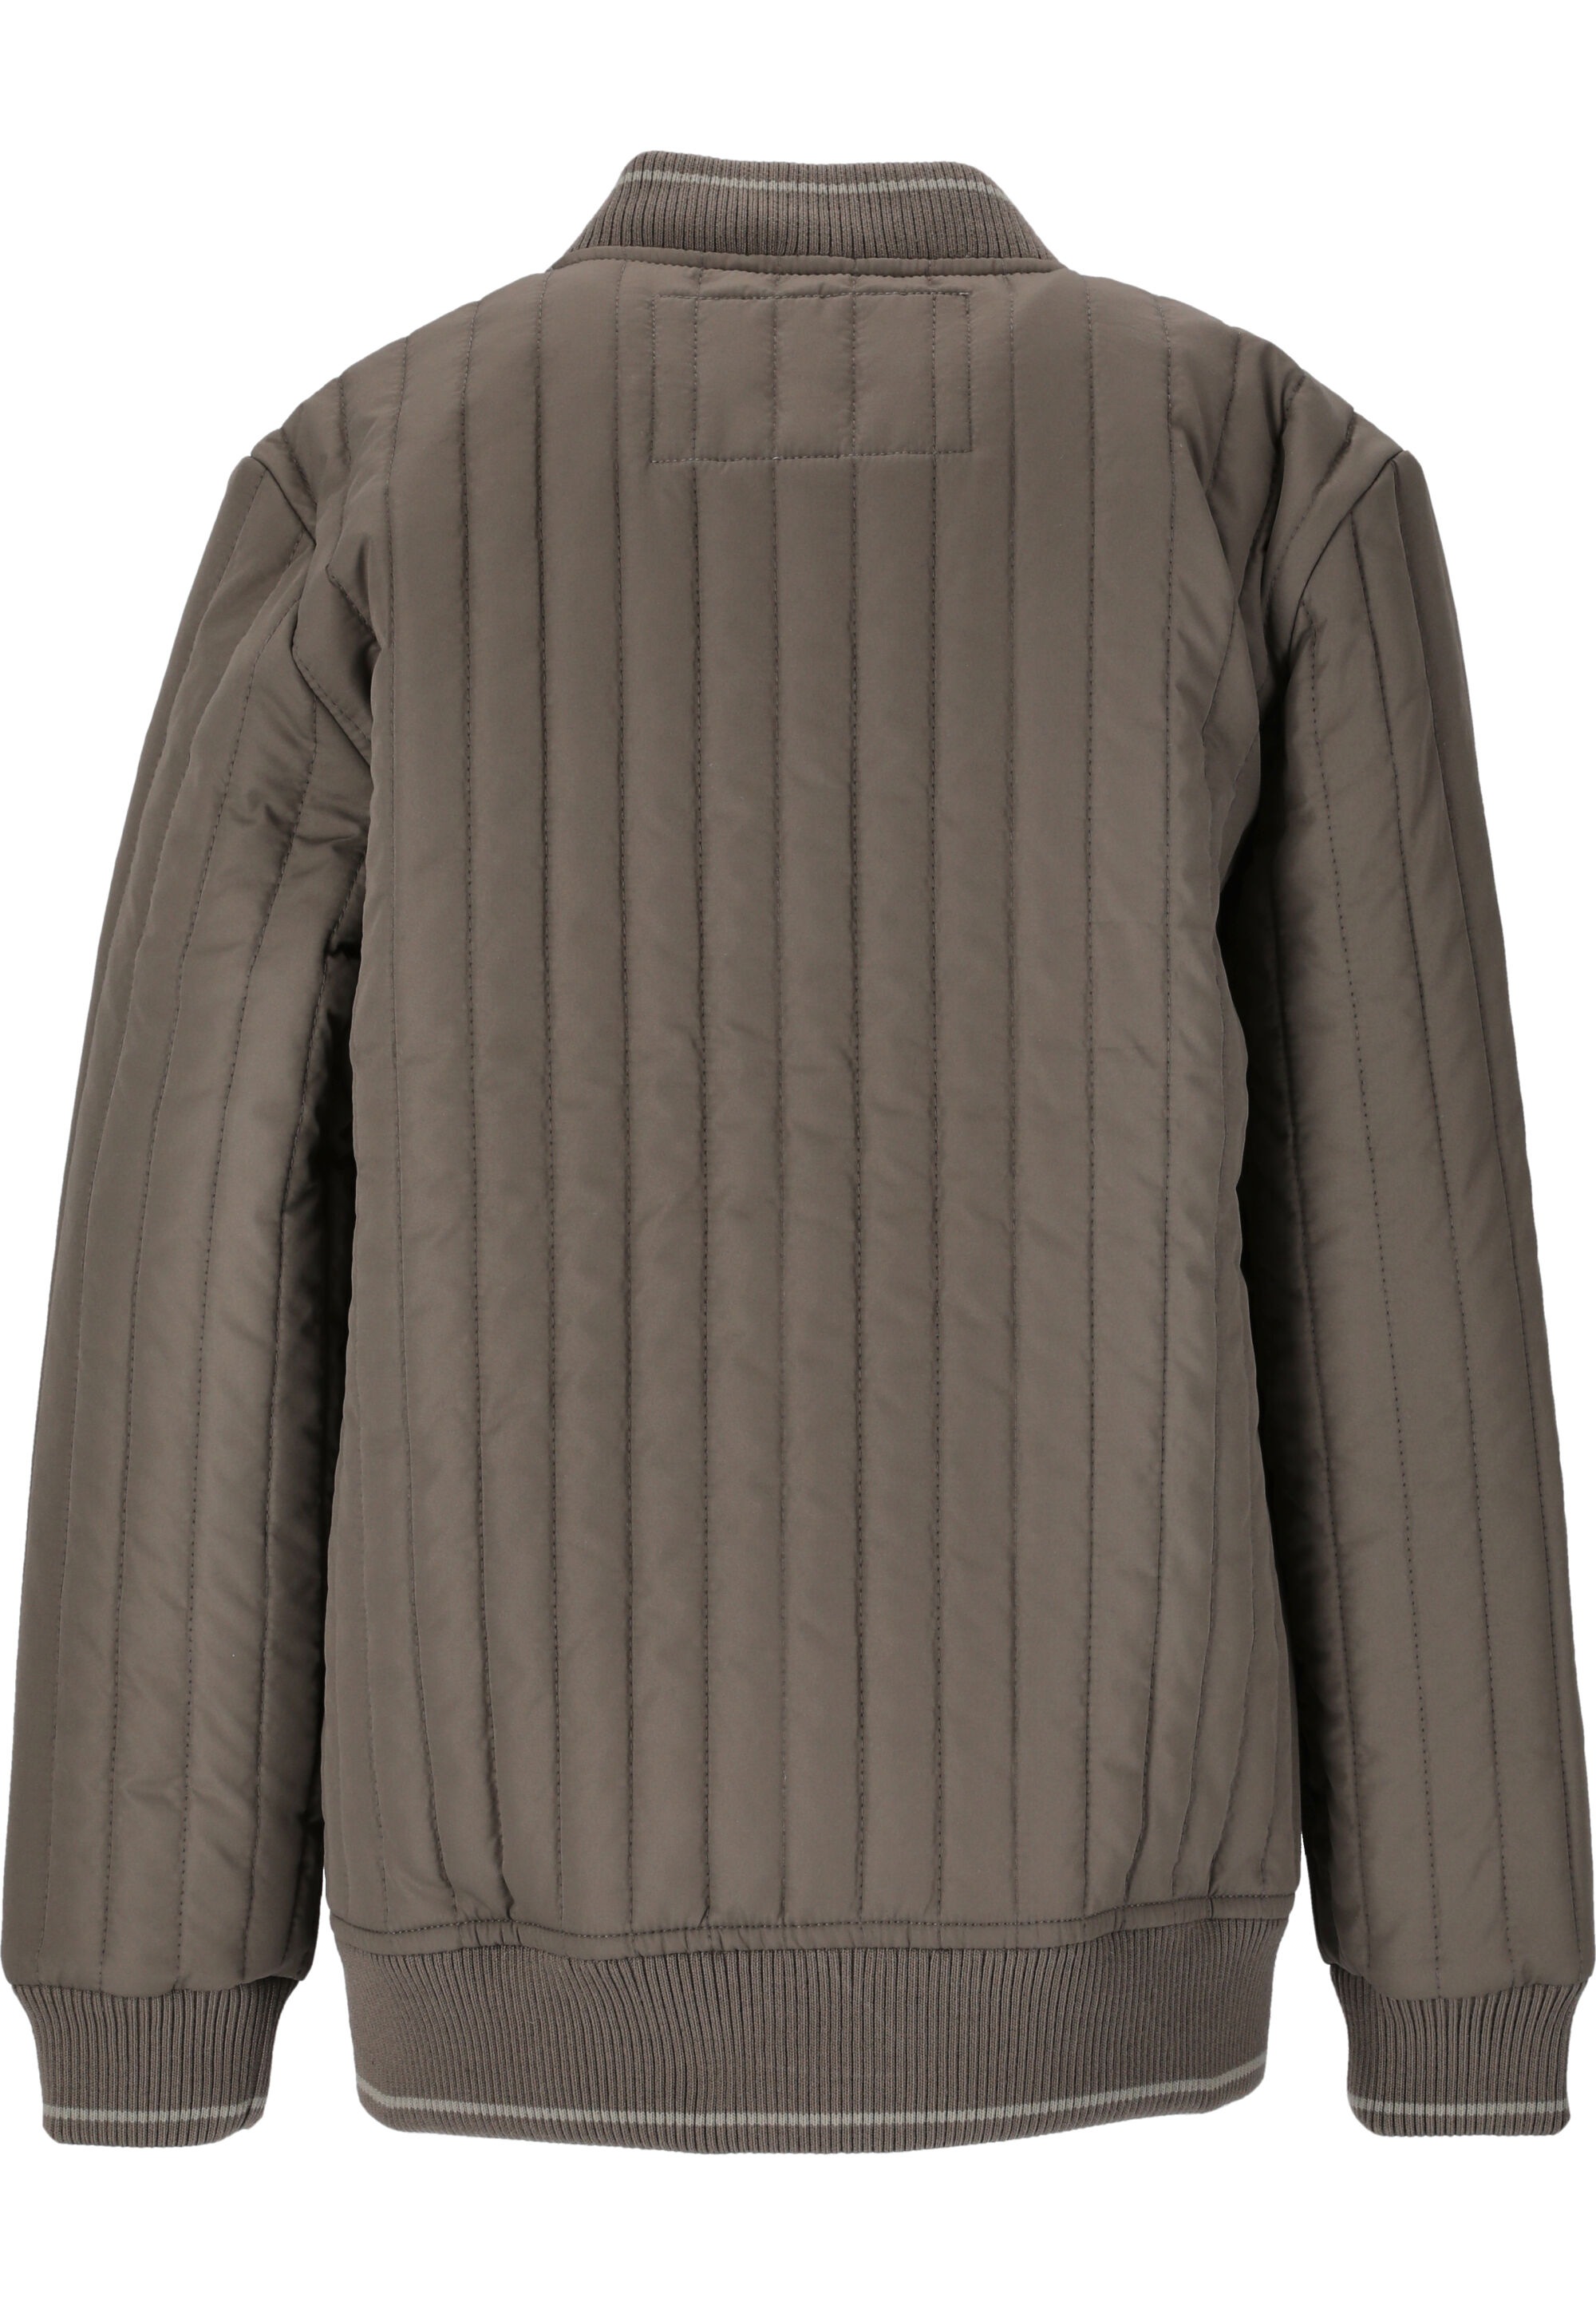 WEATHER REPORT Outdoorjacke »Palle«, in tollem Design